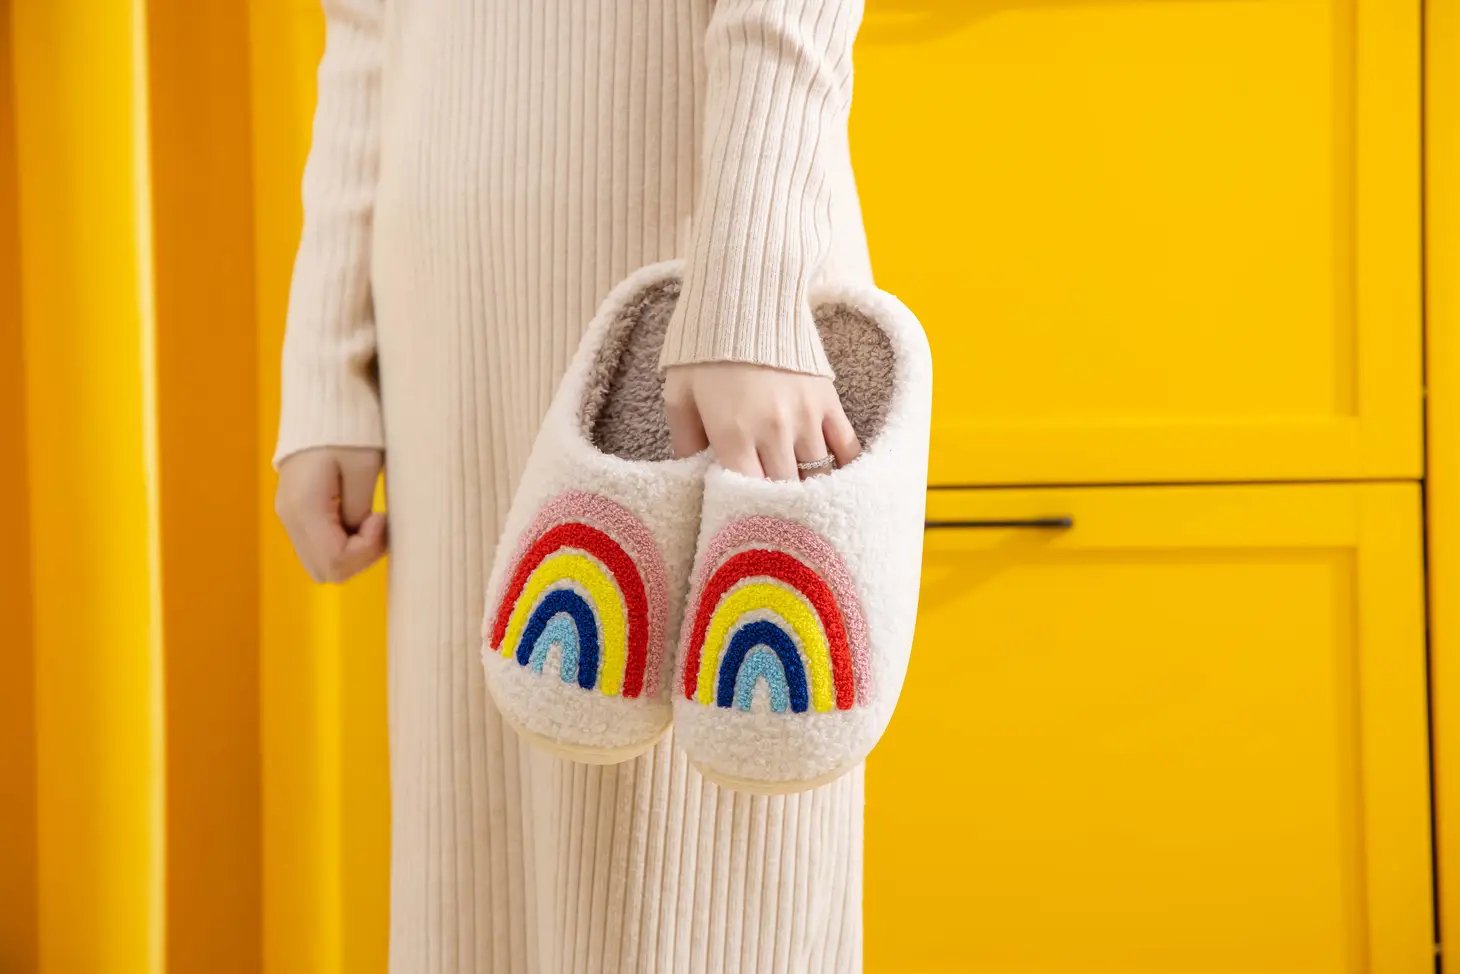 Fluffy Rainbow House Slippers - Small (5.5-6.5/37-38) - Slippers